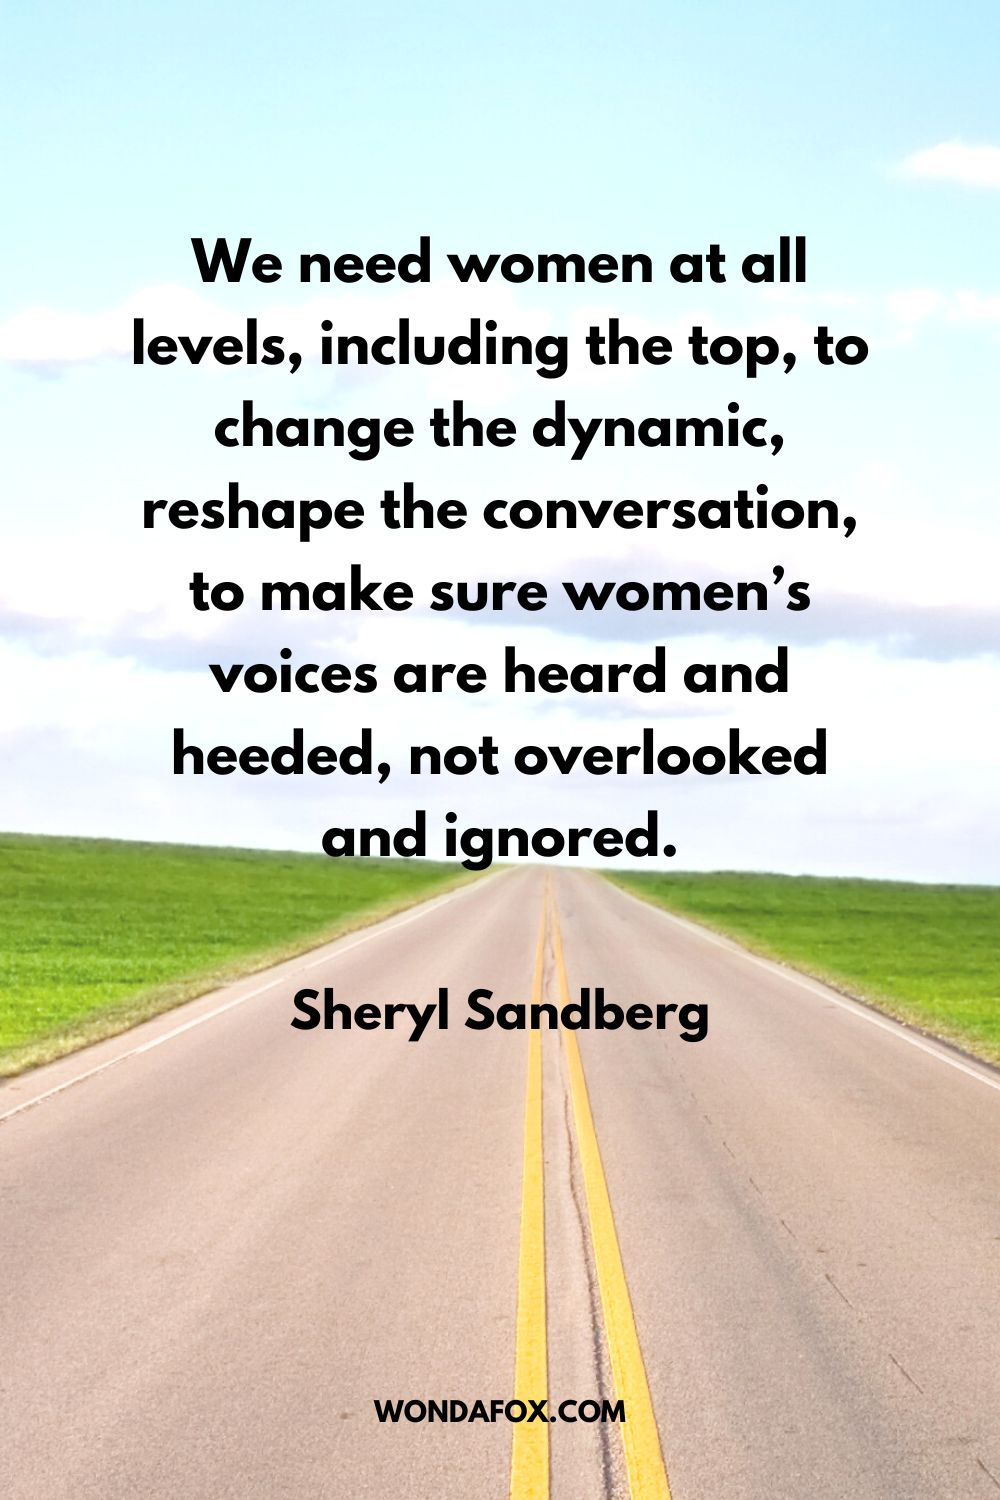 We need women at all levels, including the top, to change the dynamic, reshape the conversation, to make sure women’s voices are heard and heeded, not overlooked and ignored. Sheryl Sandberg